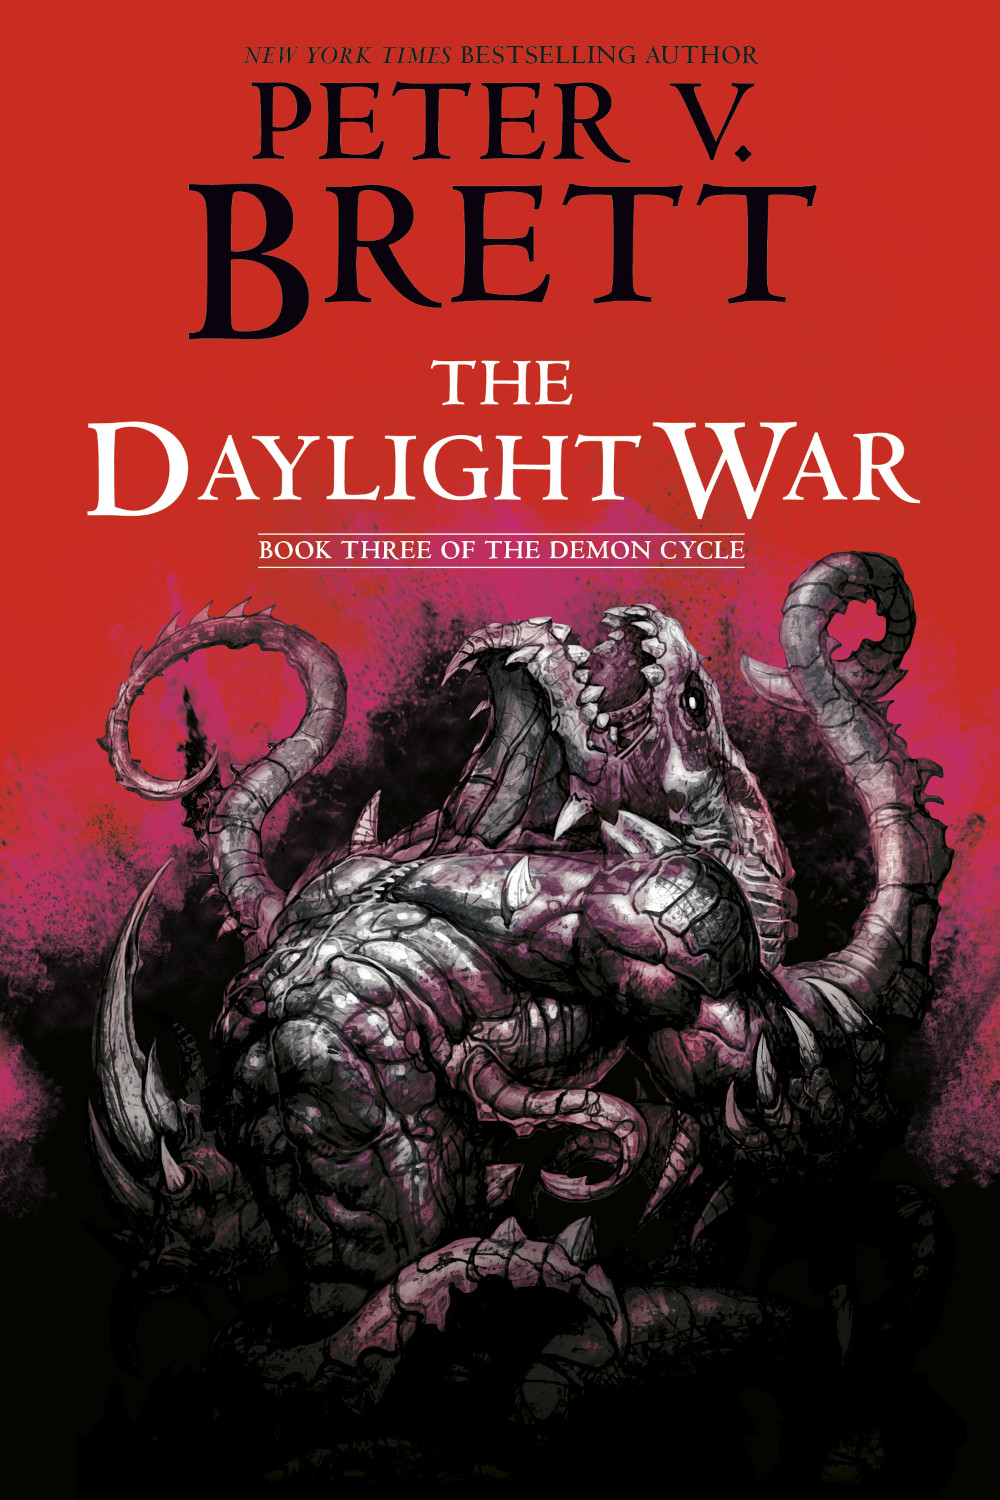 The Daylight War by Peter V. Brett, Book Three of The Demon Cycle (US cover)